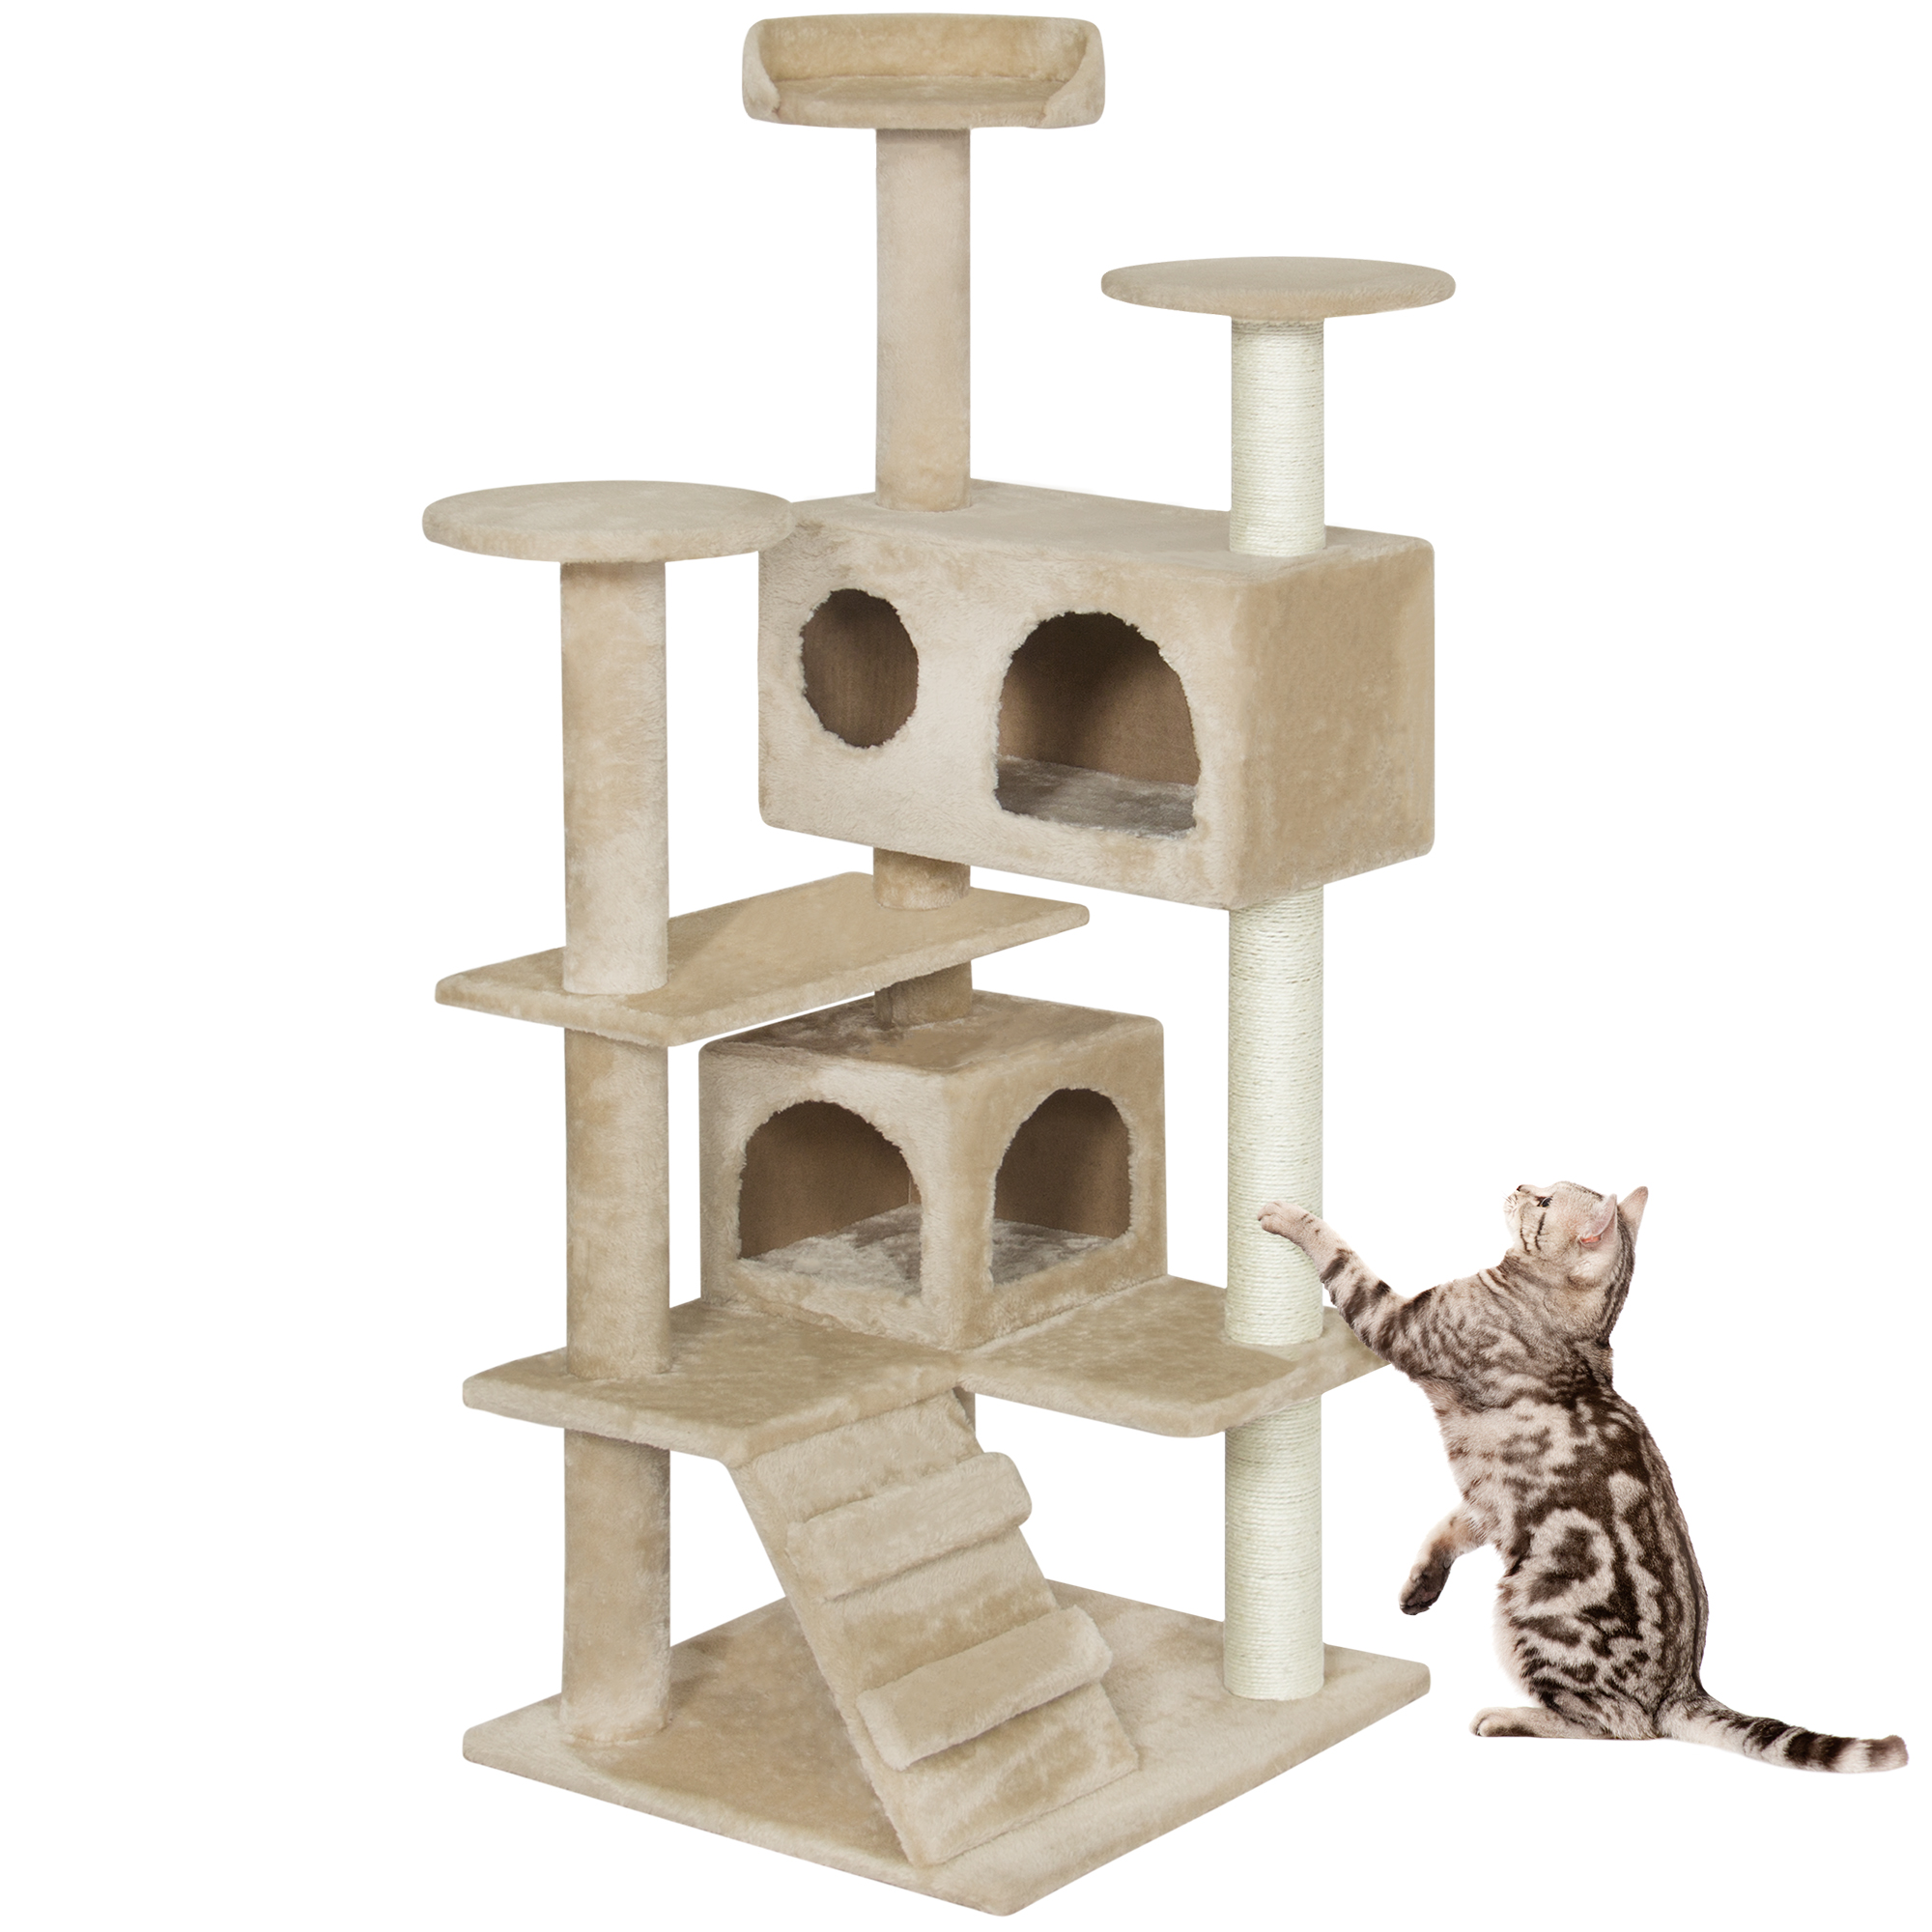 Best Choice Products 53in Multi-Level Cat Tree Scratcher Condo Tower - Beige - image 1 of 7